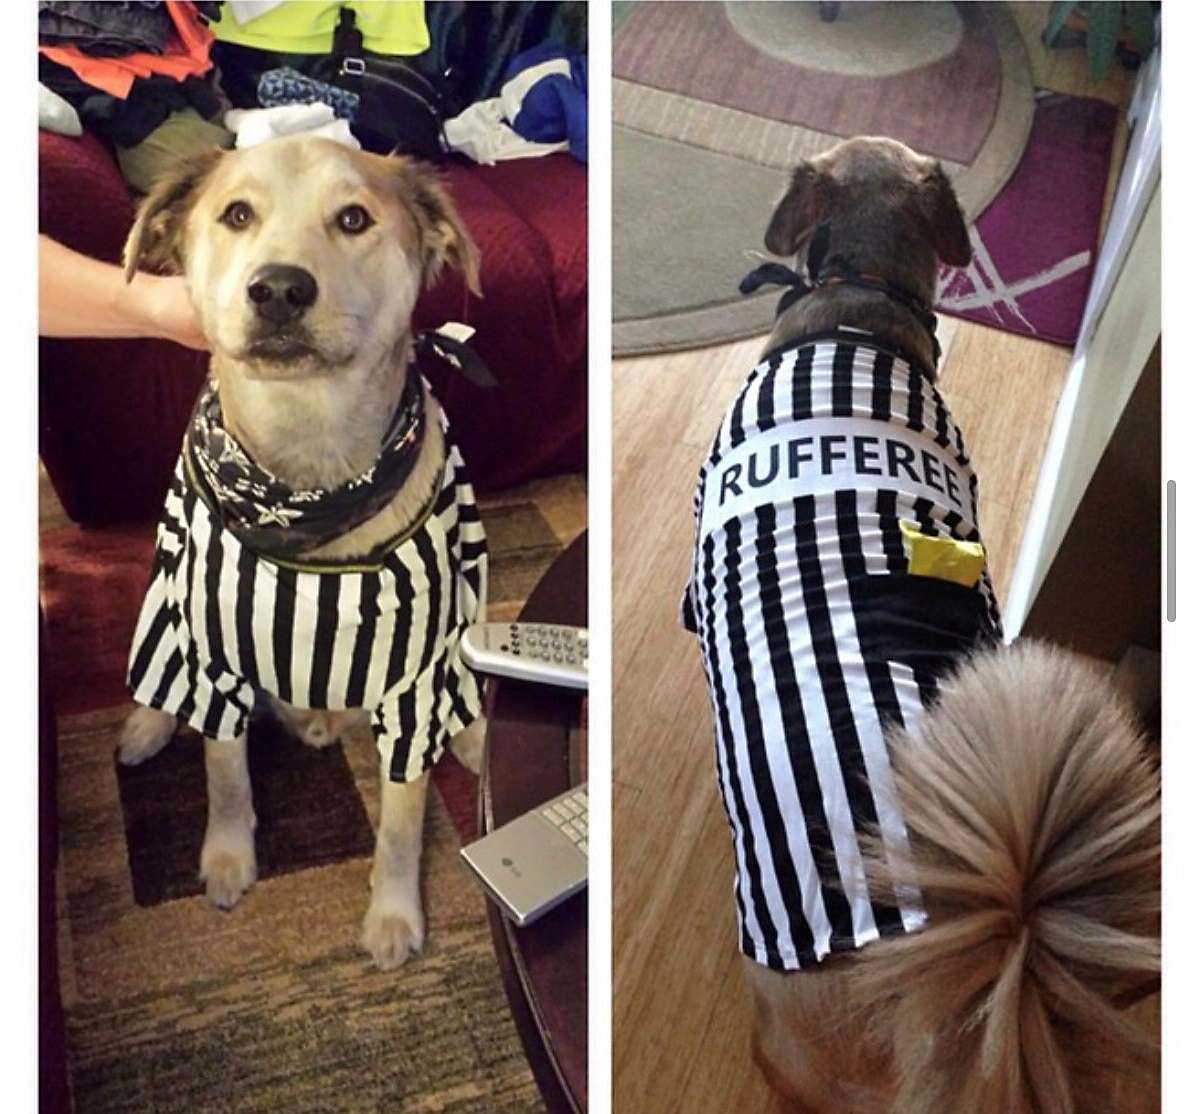 Lab/chow mix dog dressed in referee pet costume